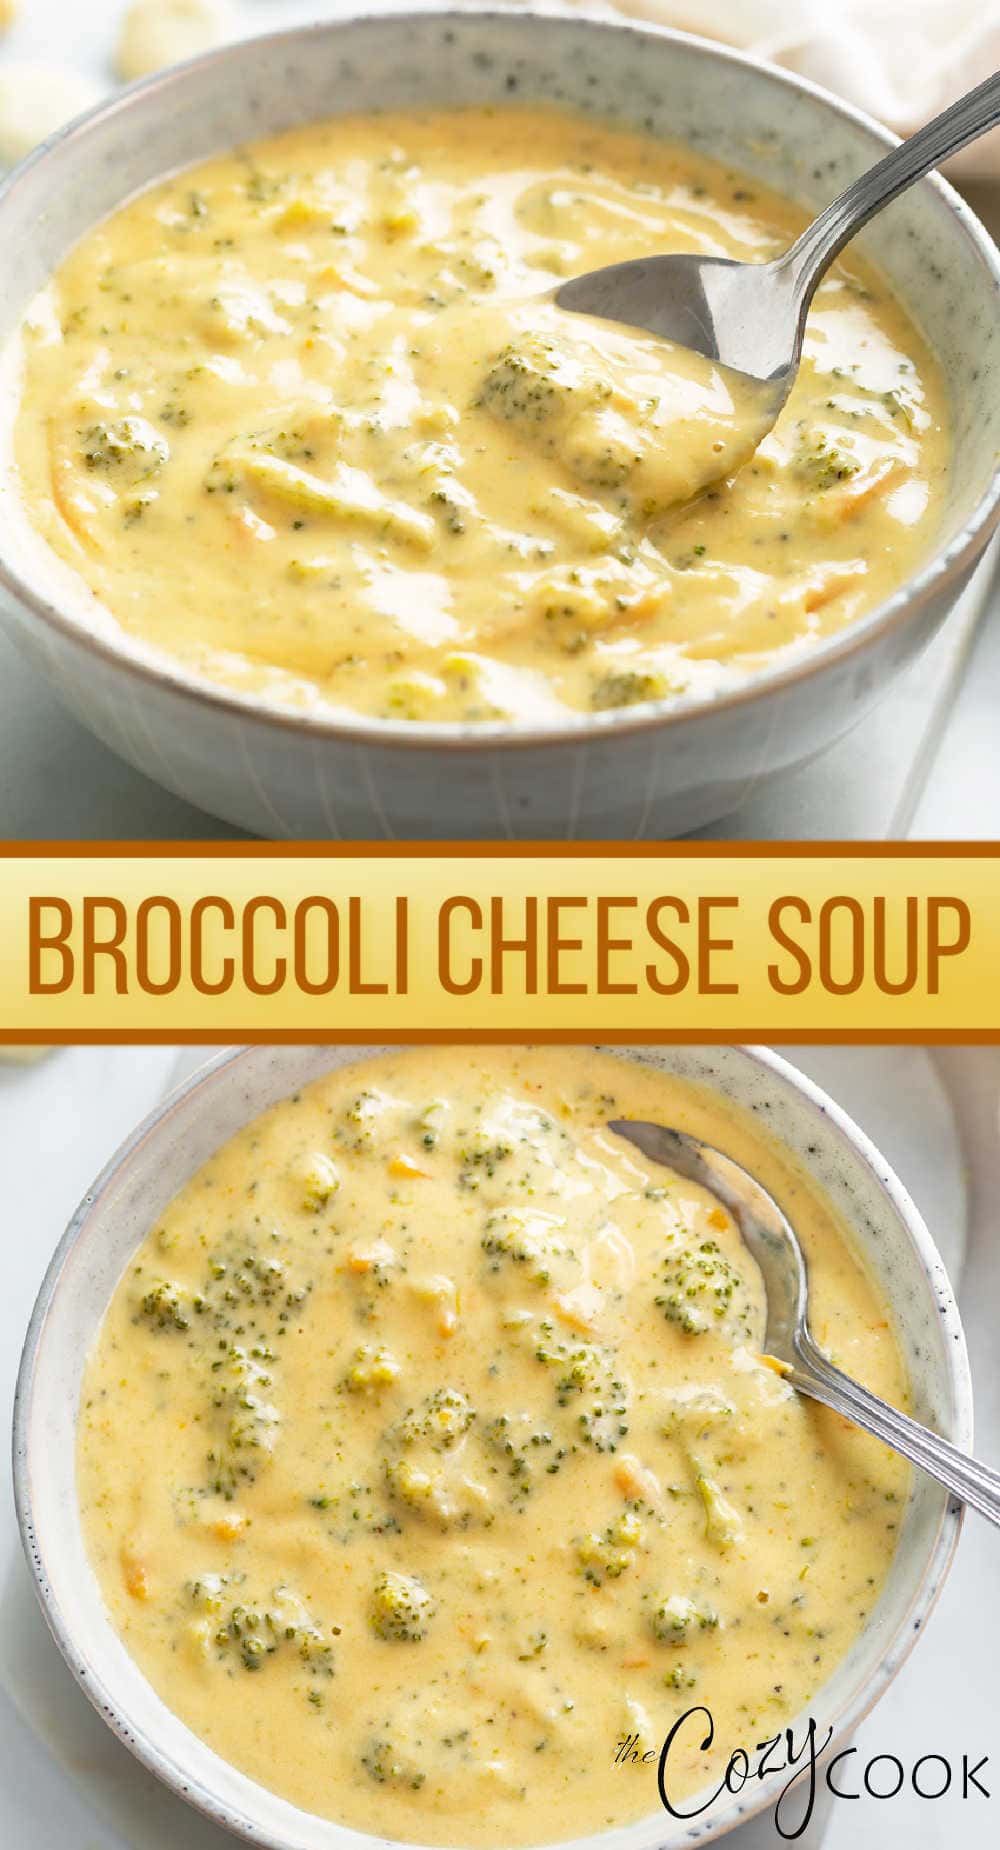 Broccoli Cheese Soup - The Cozy Cook